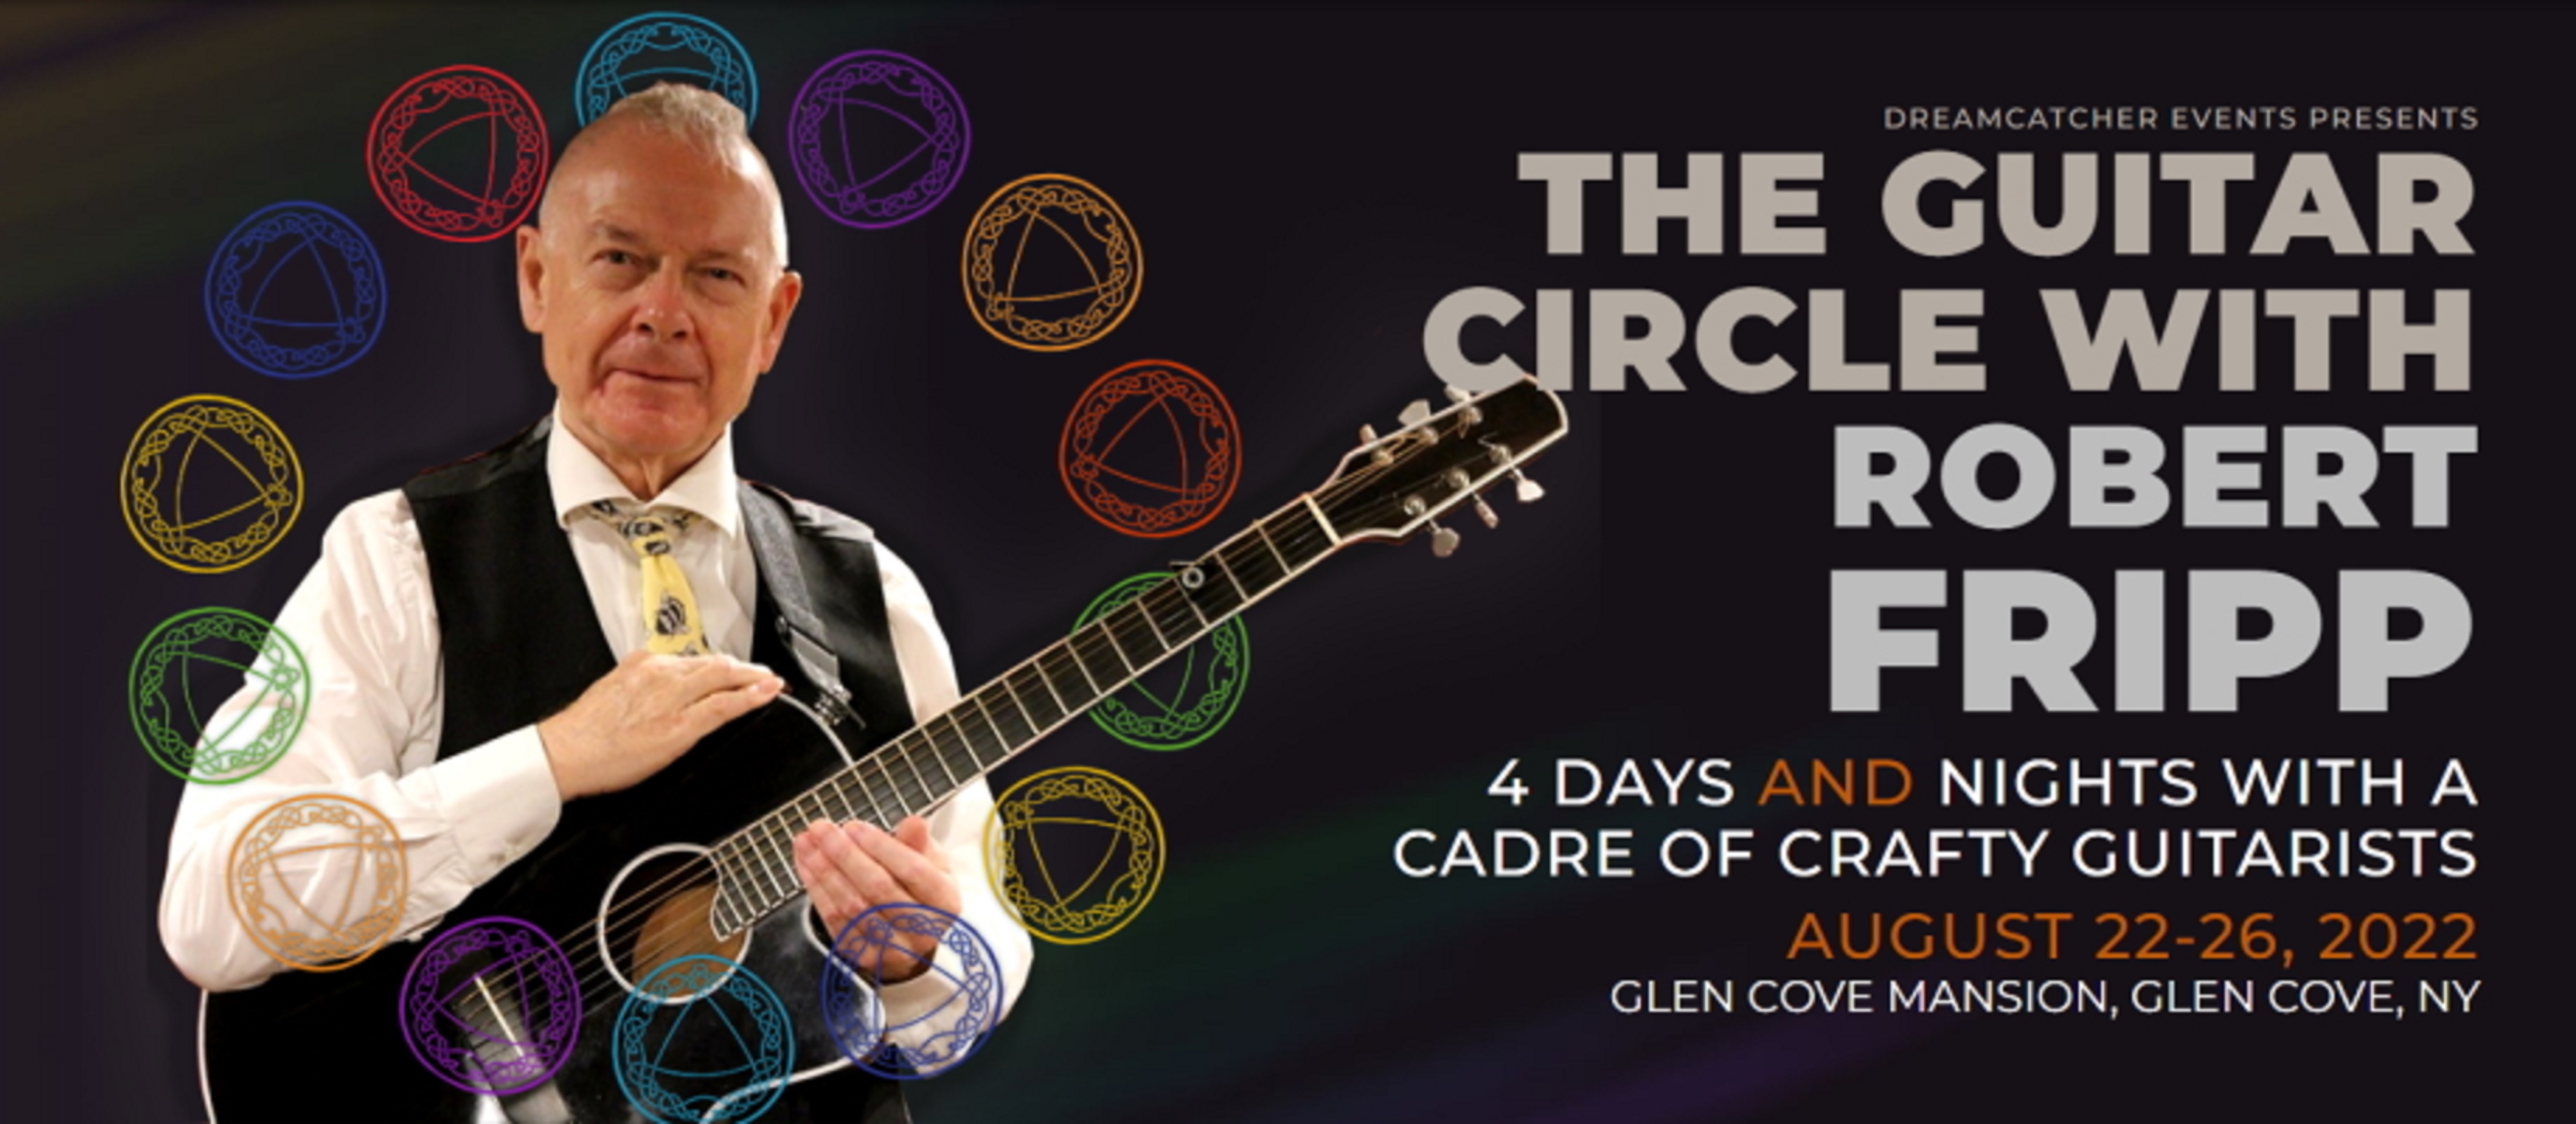 The Guitar Circle With Robert Fripp August 22-26, 2022 at The Mansion at Glen Cove, NY